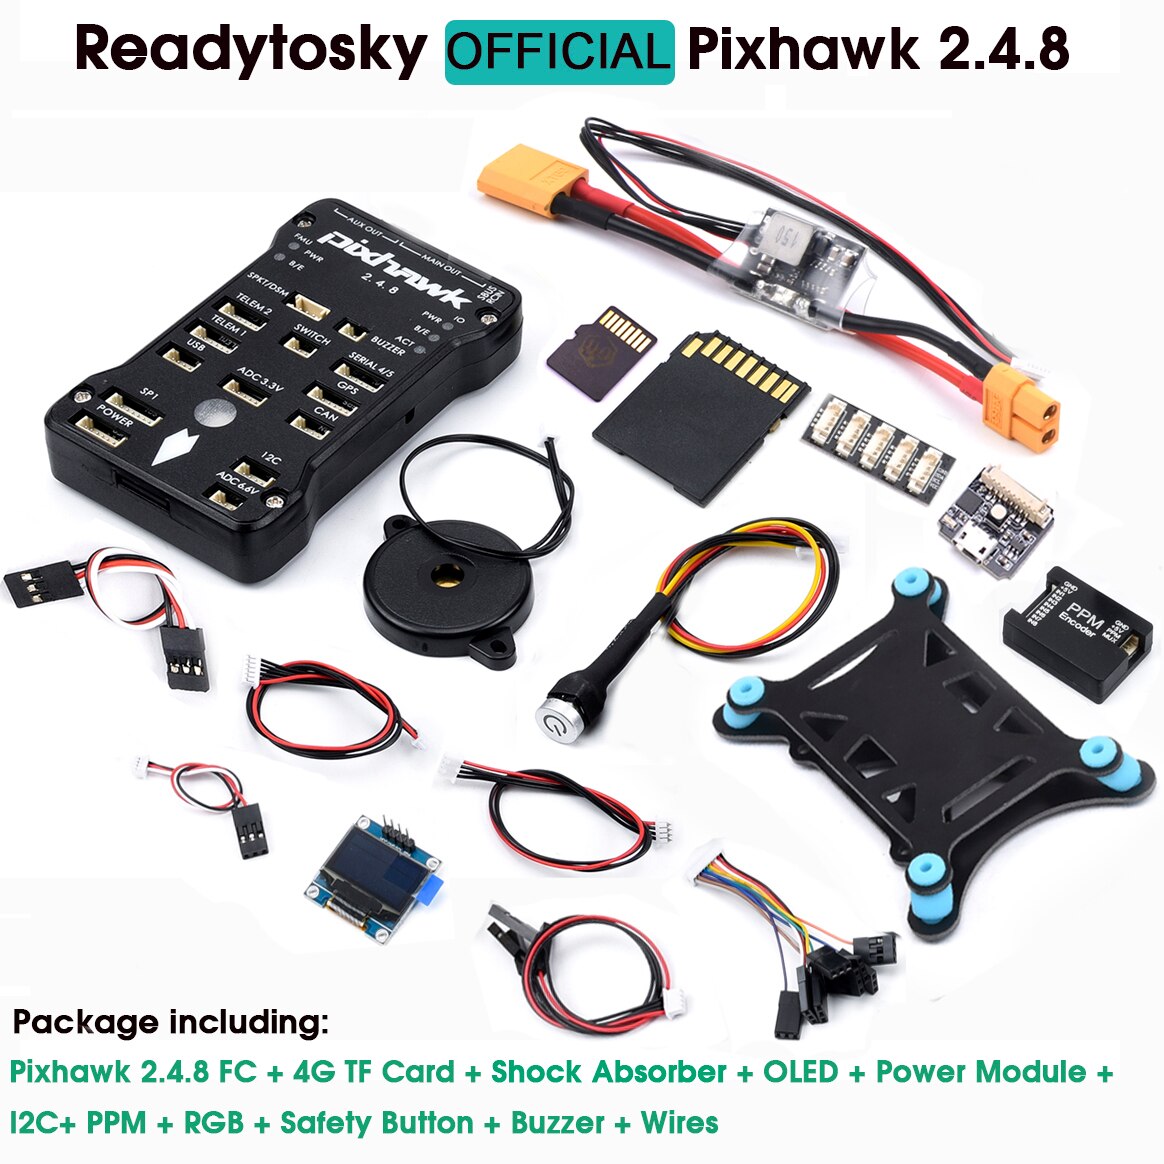 Package includes: Pixhawk 2.4.8 FC + 4G TF Card Shock Absorb